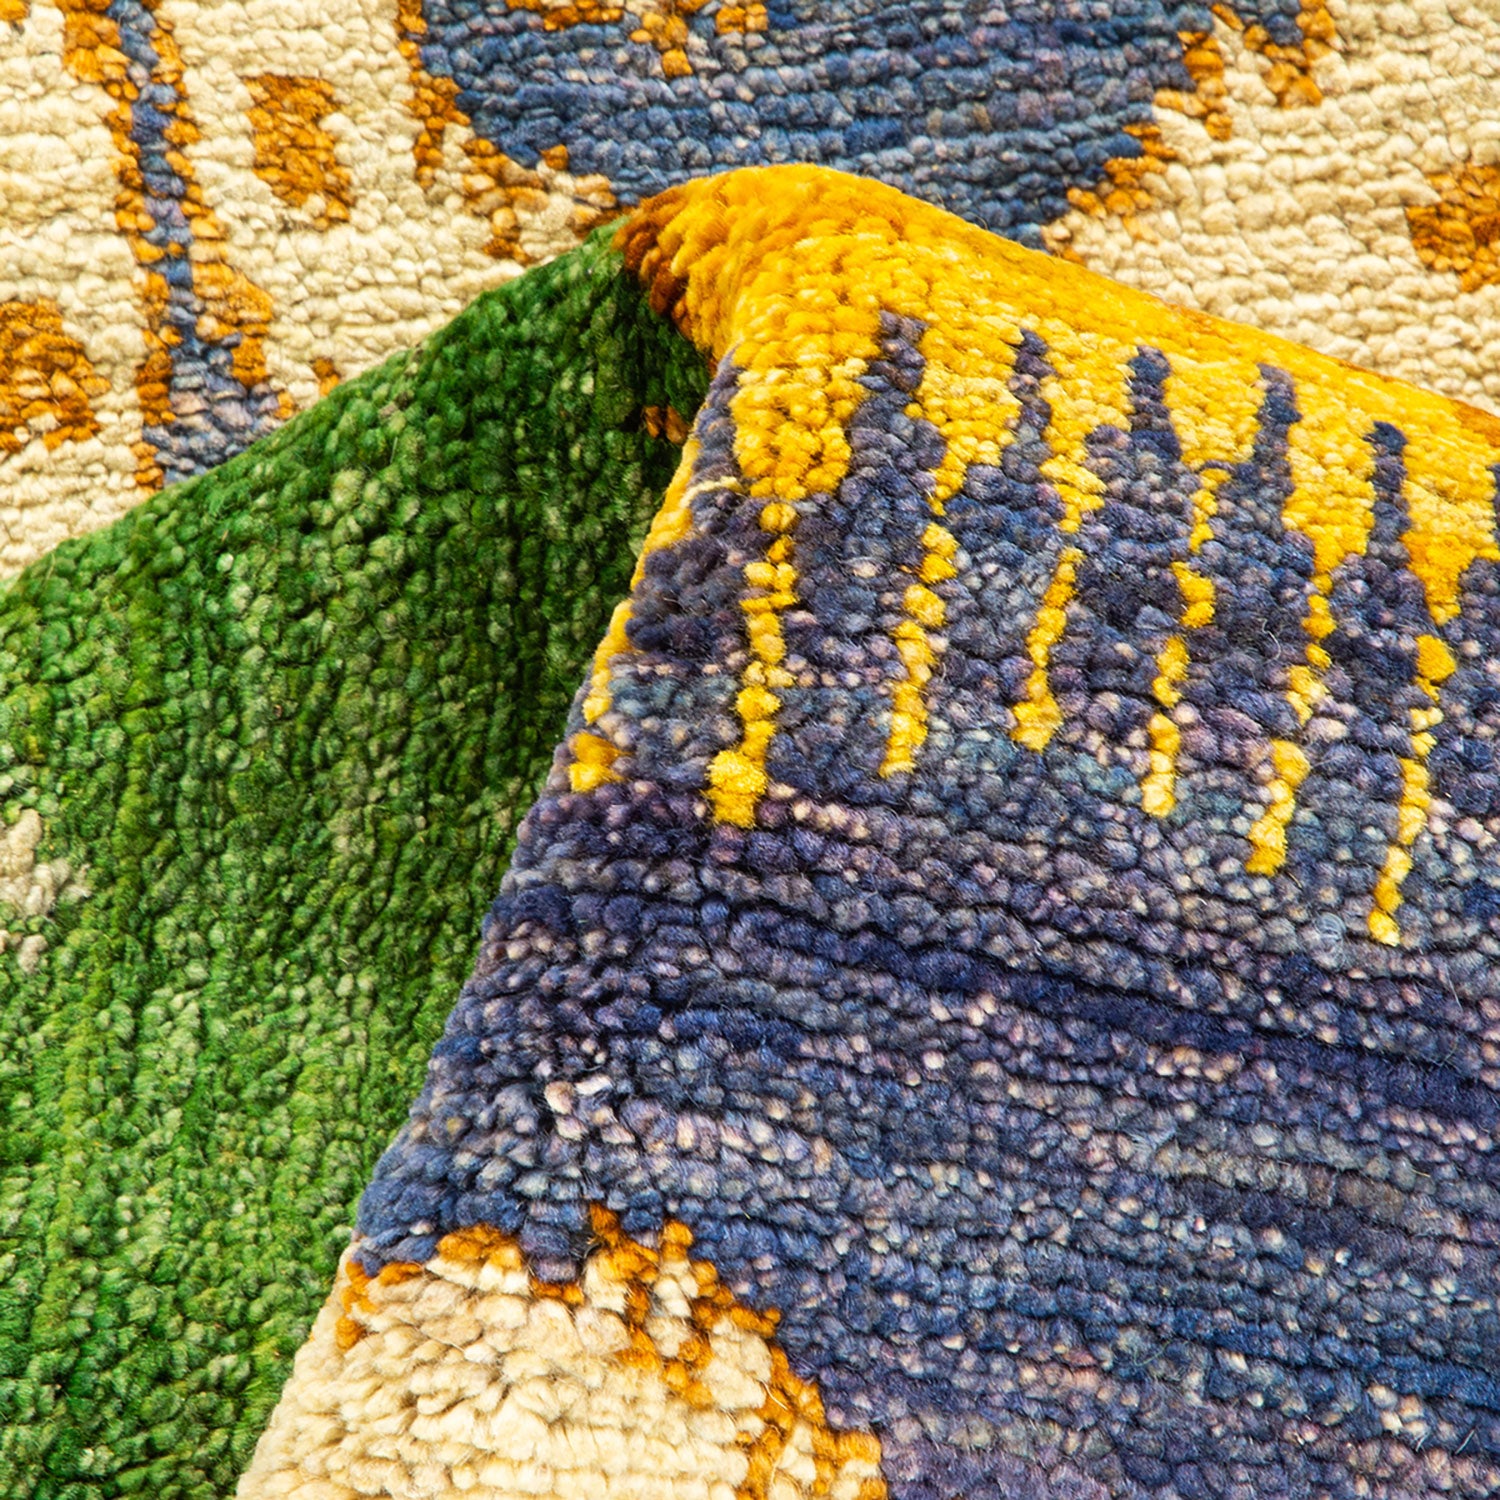 Vibrant and textured close-up of a colorful textile rug.